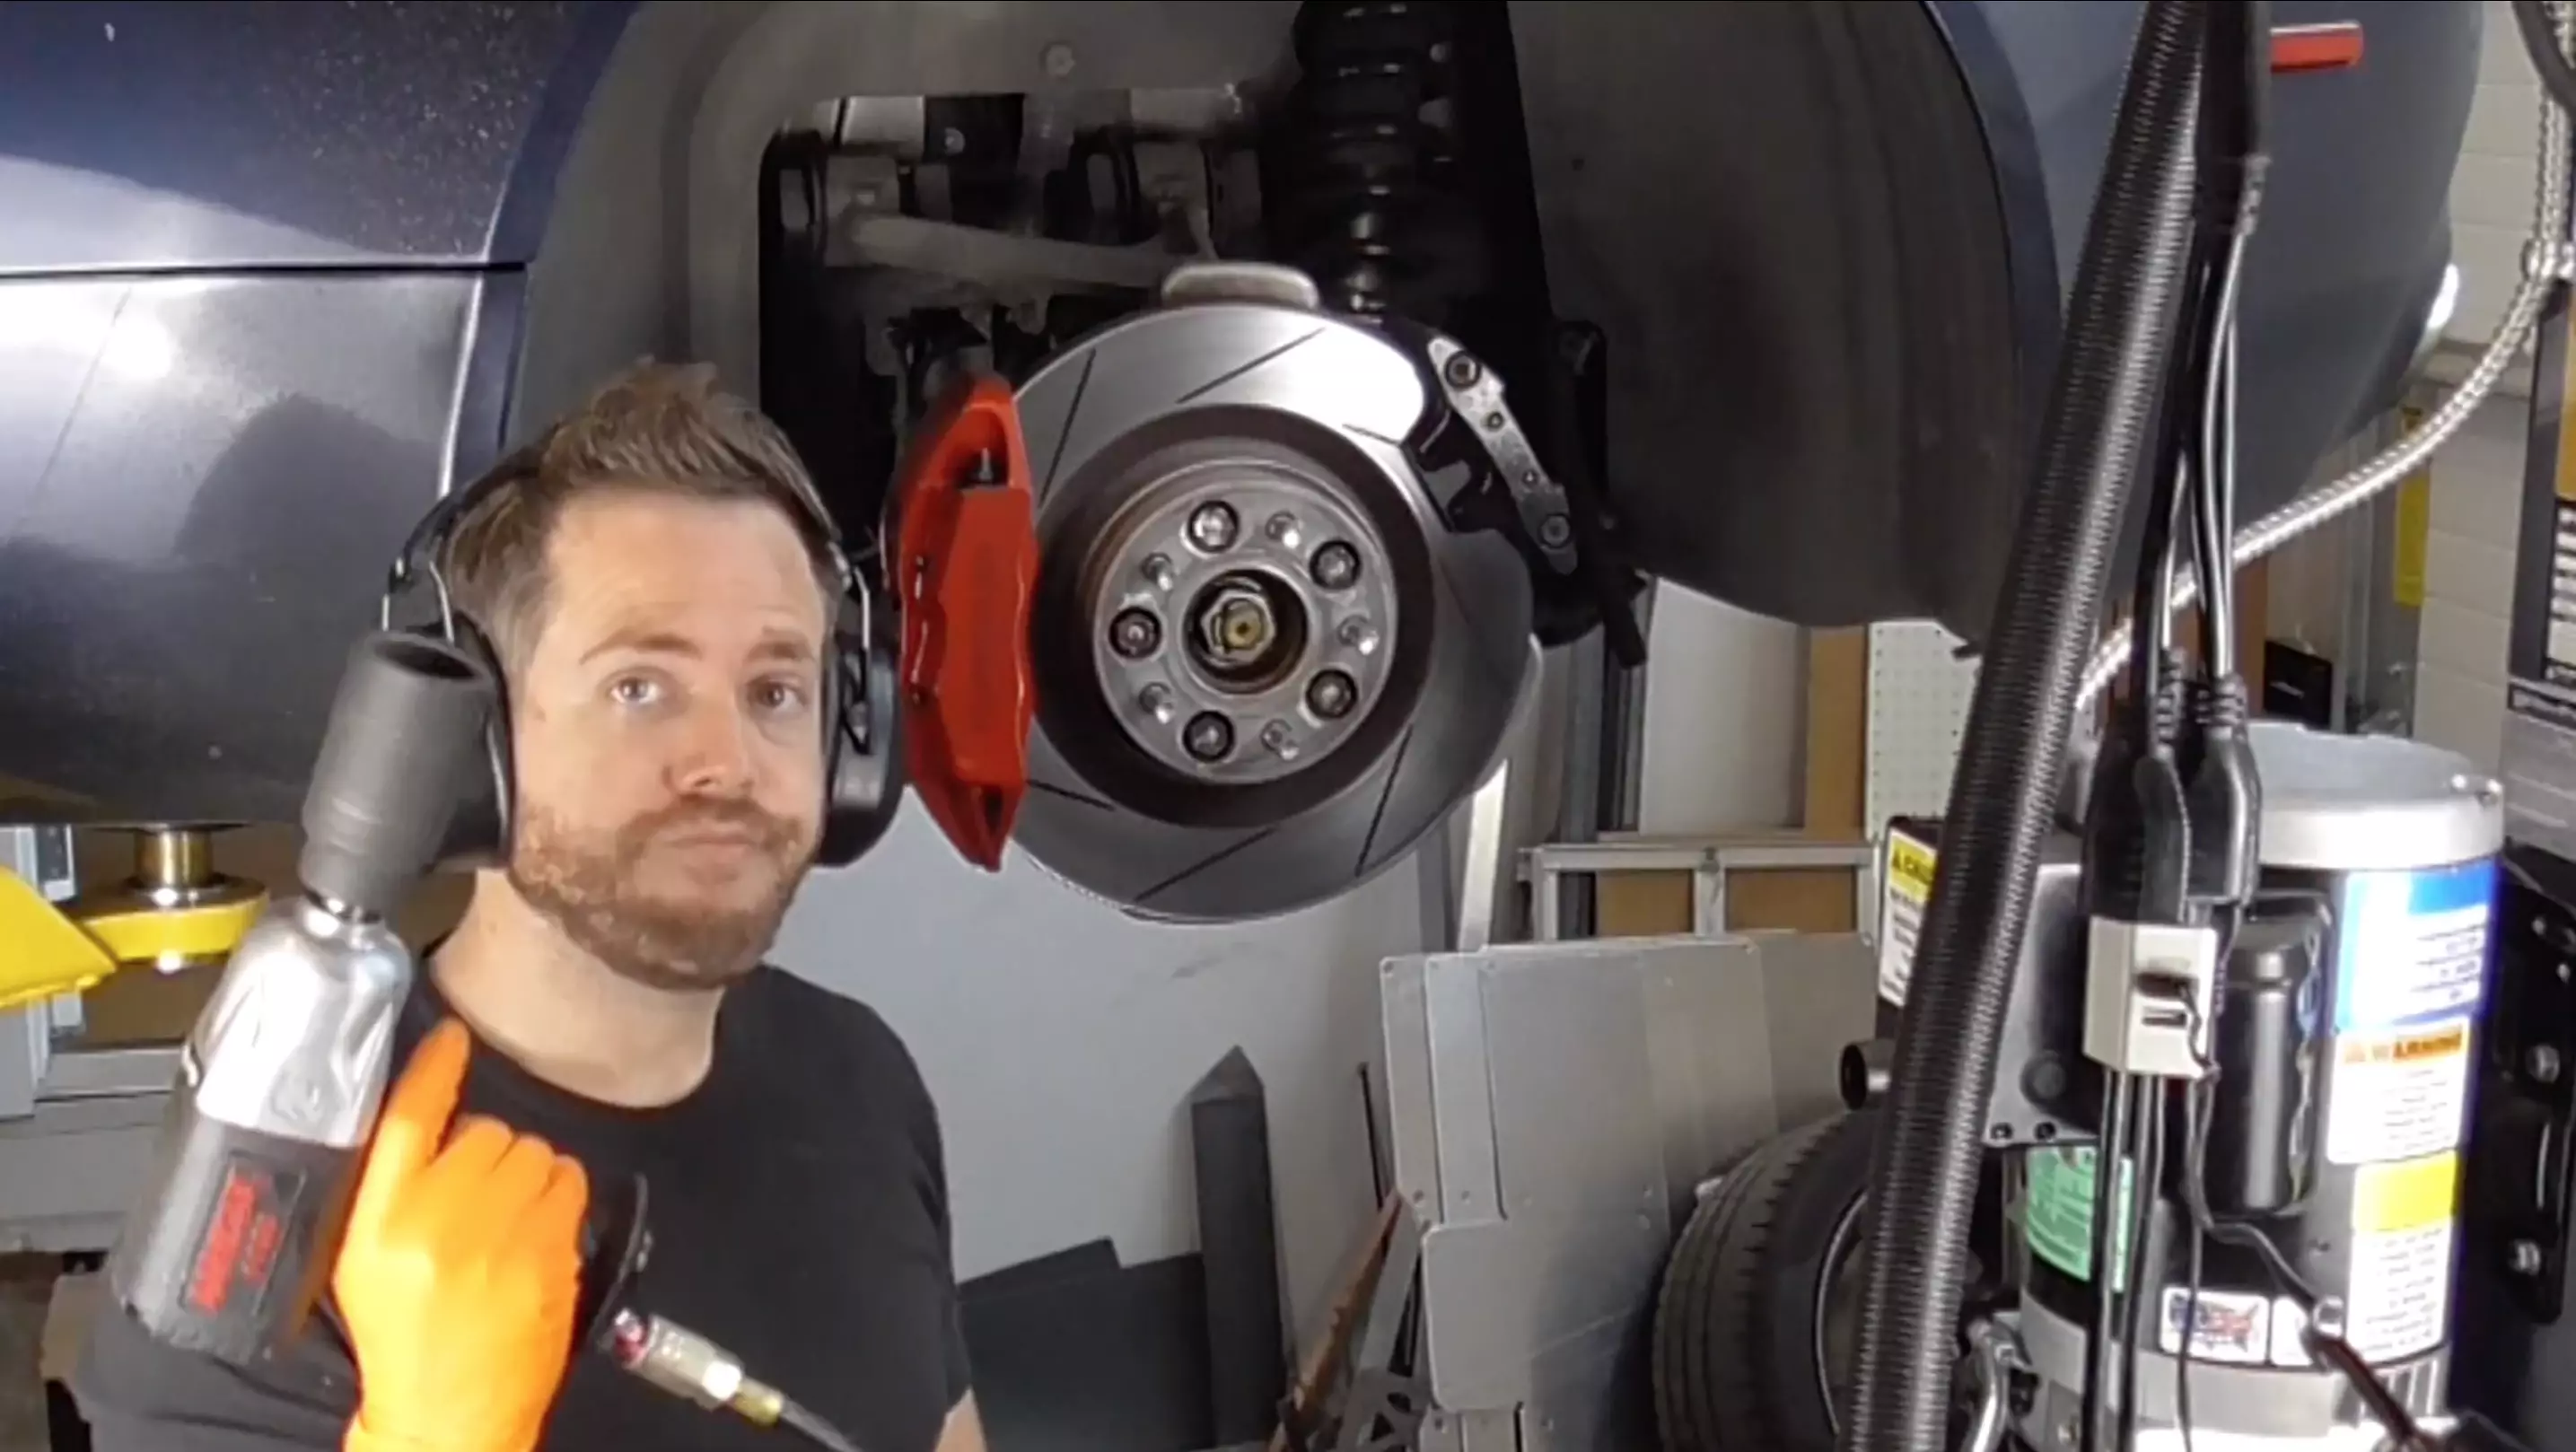 The Most Important Tool for DIY Repairing an Aston Martin Is a Sense of Humor | Autance